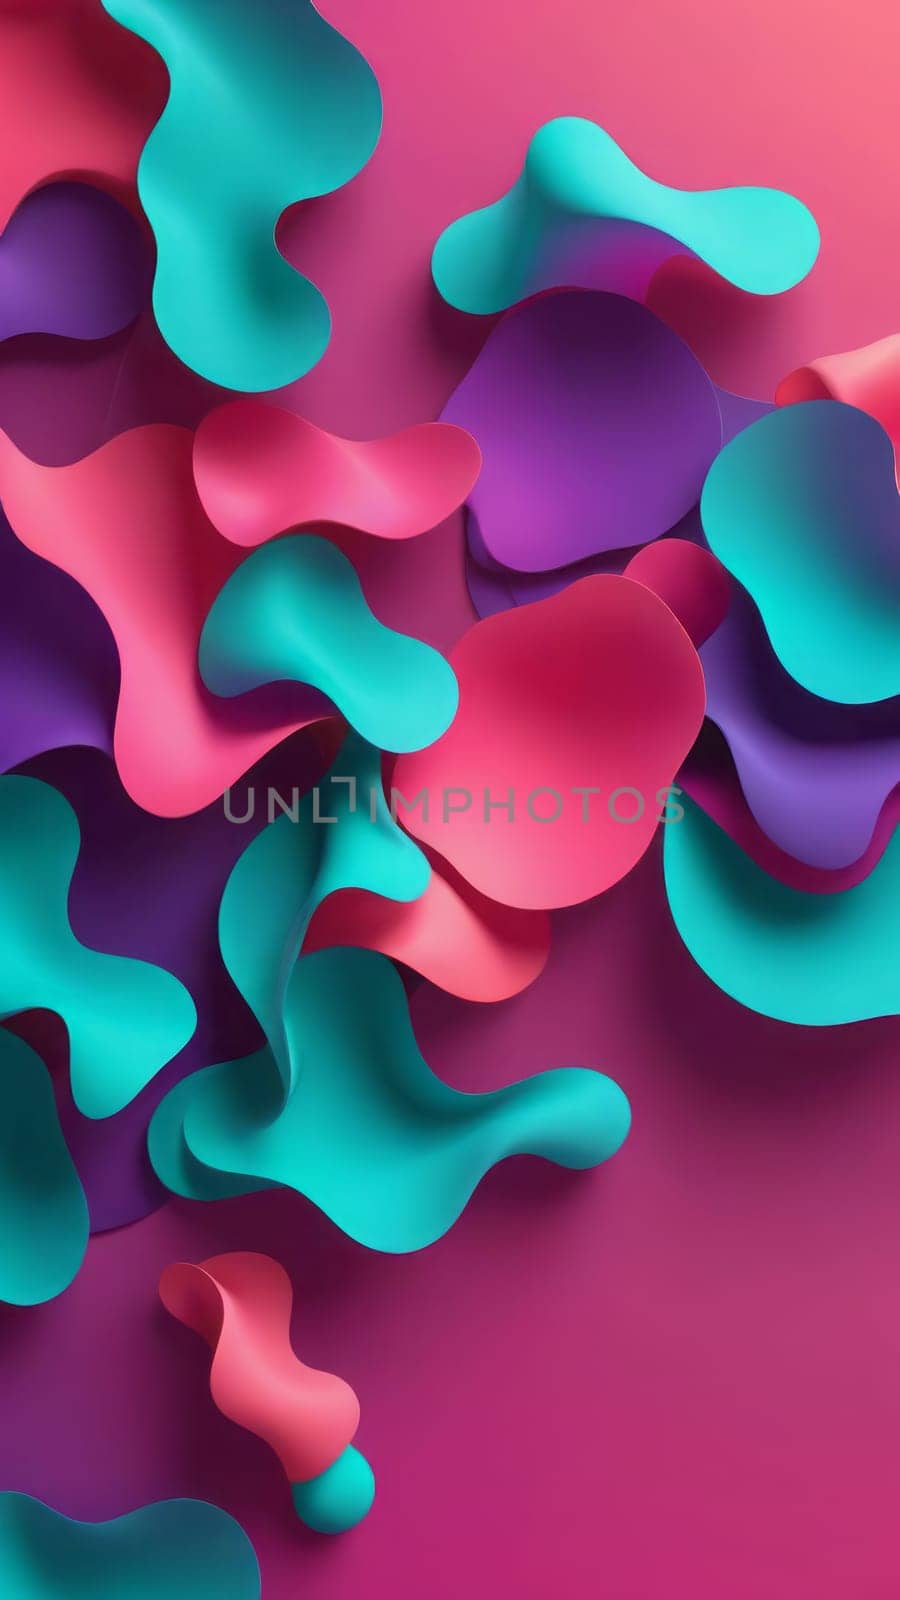 Screen background from Hollow shapes and fuchsia by nkotlyar